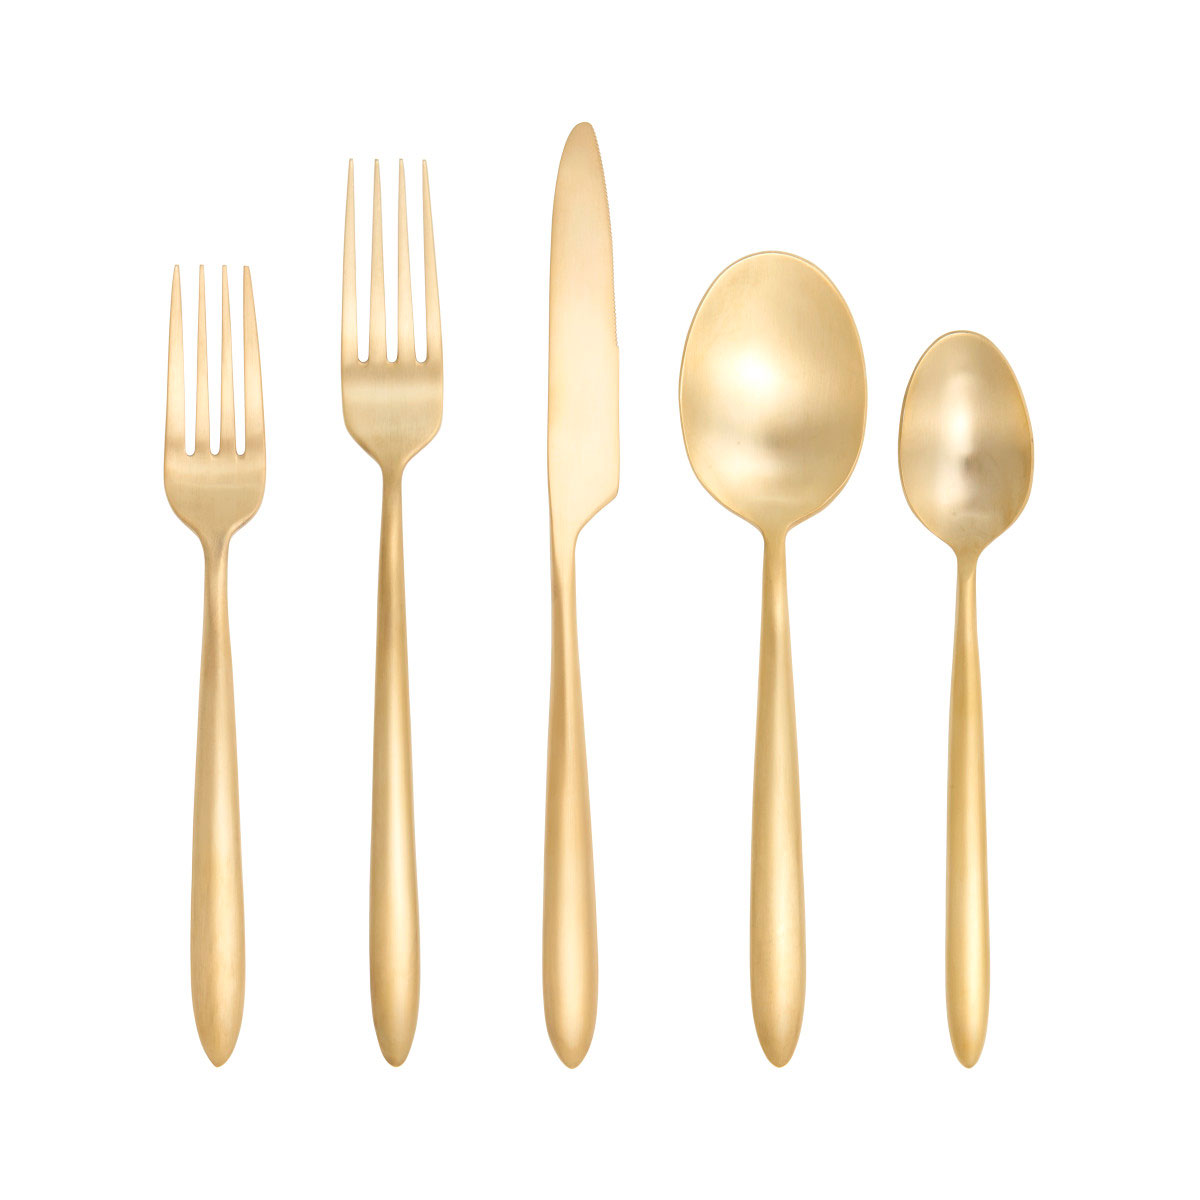 Fortessa Stainless Flatware Velo Brushed Gold Plated 5 Piece Place Setting